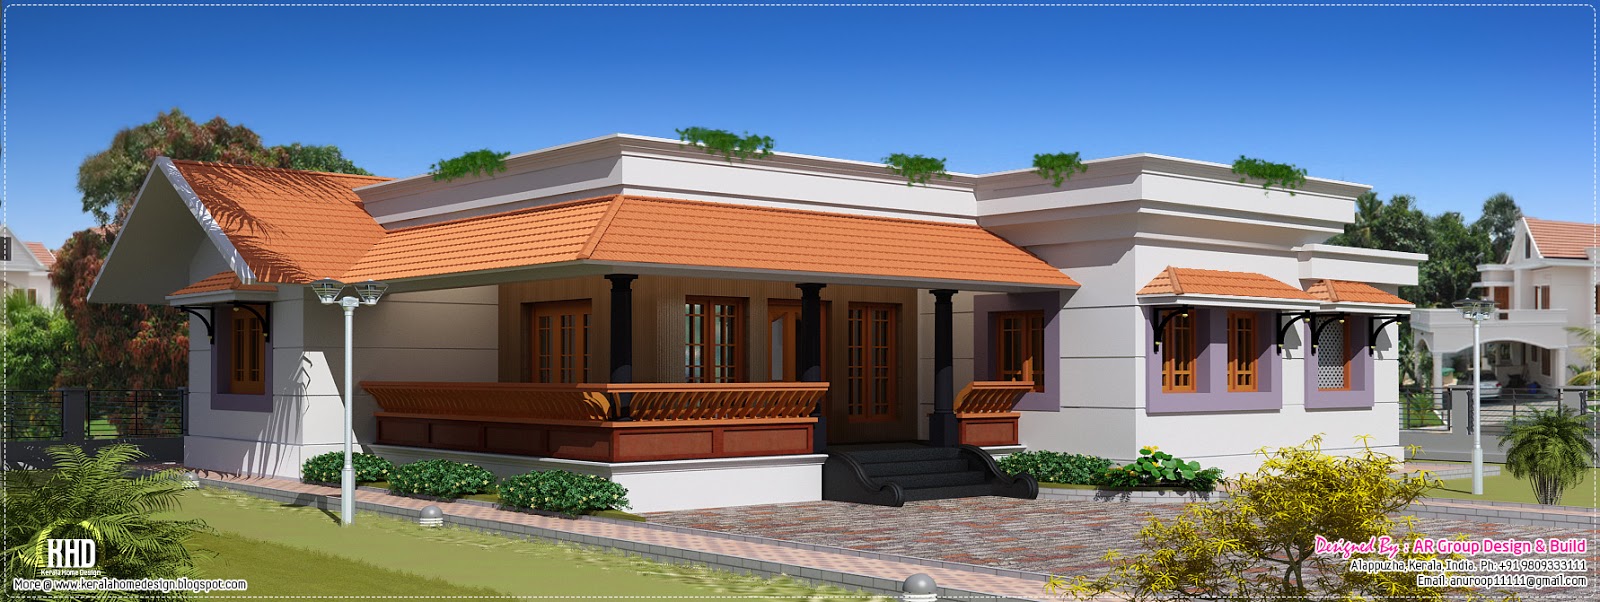 Single Story House Designs Single Story Homes One Story House ...  1600 Sq Feet Single Floor House Kerala Home Design And Floor Plans .